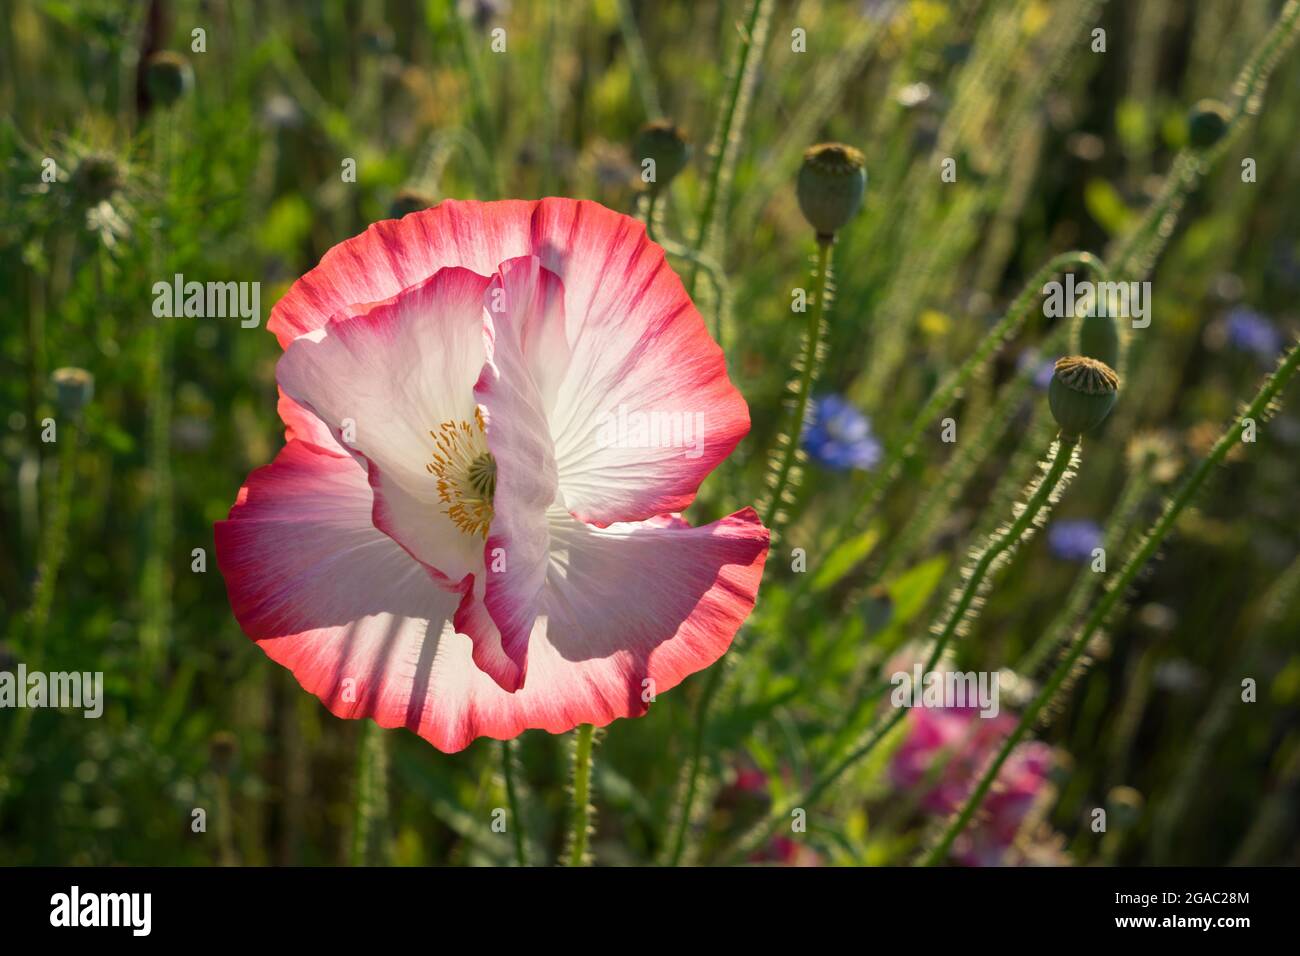 white pink poppy flower and seed capsules in the summer sun botany close-up Stock Photo